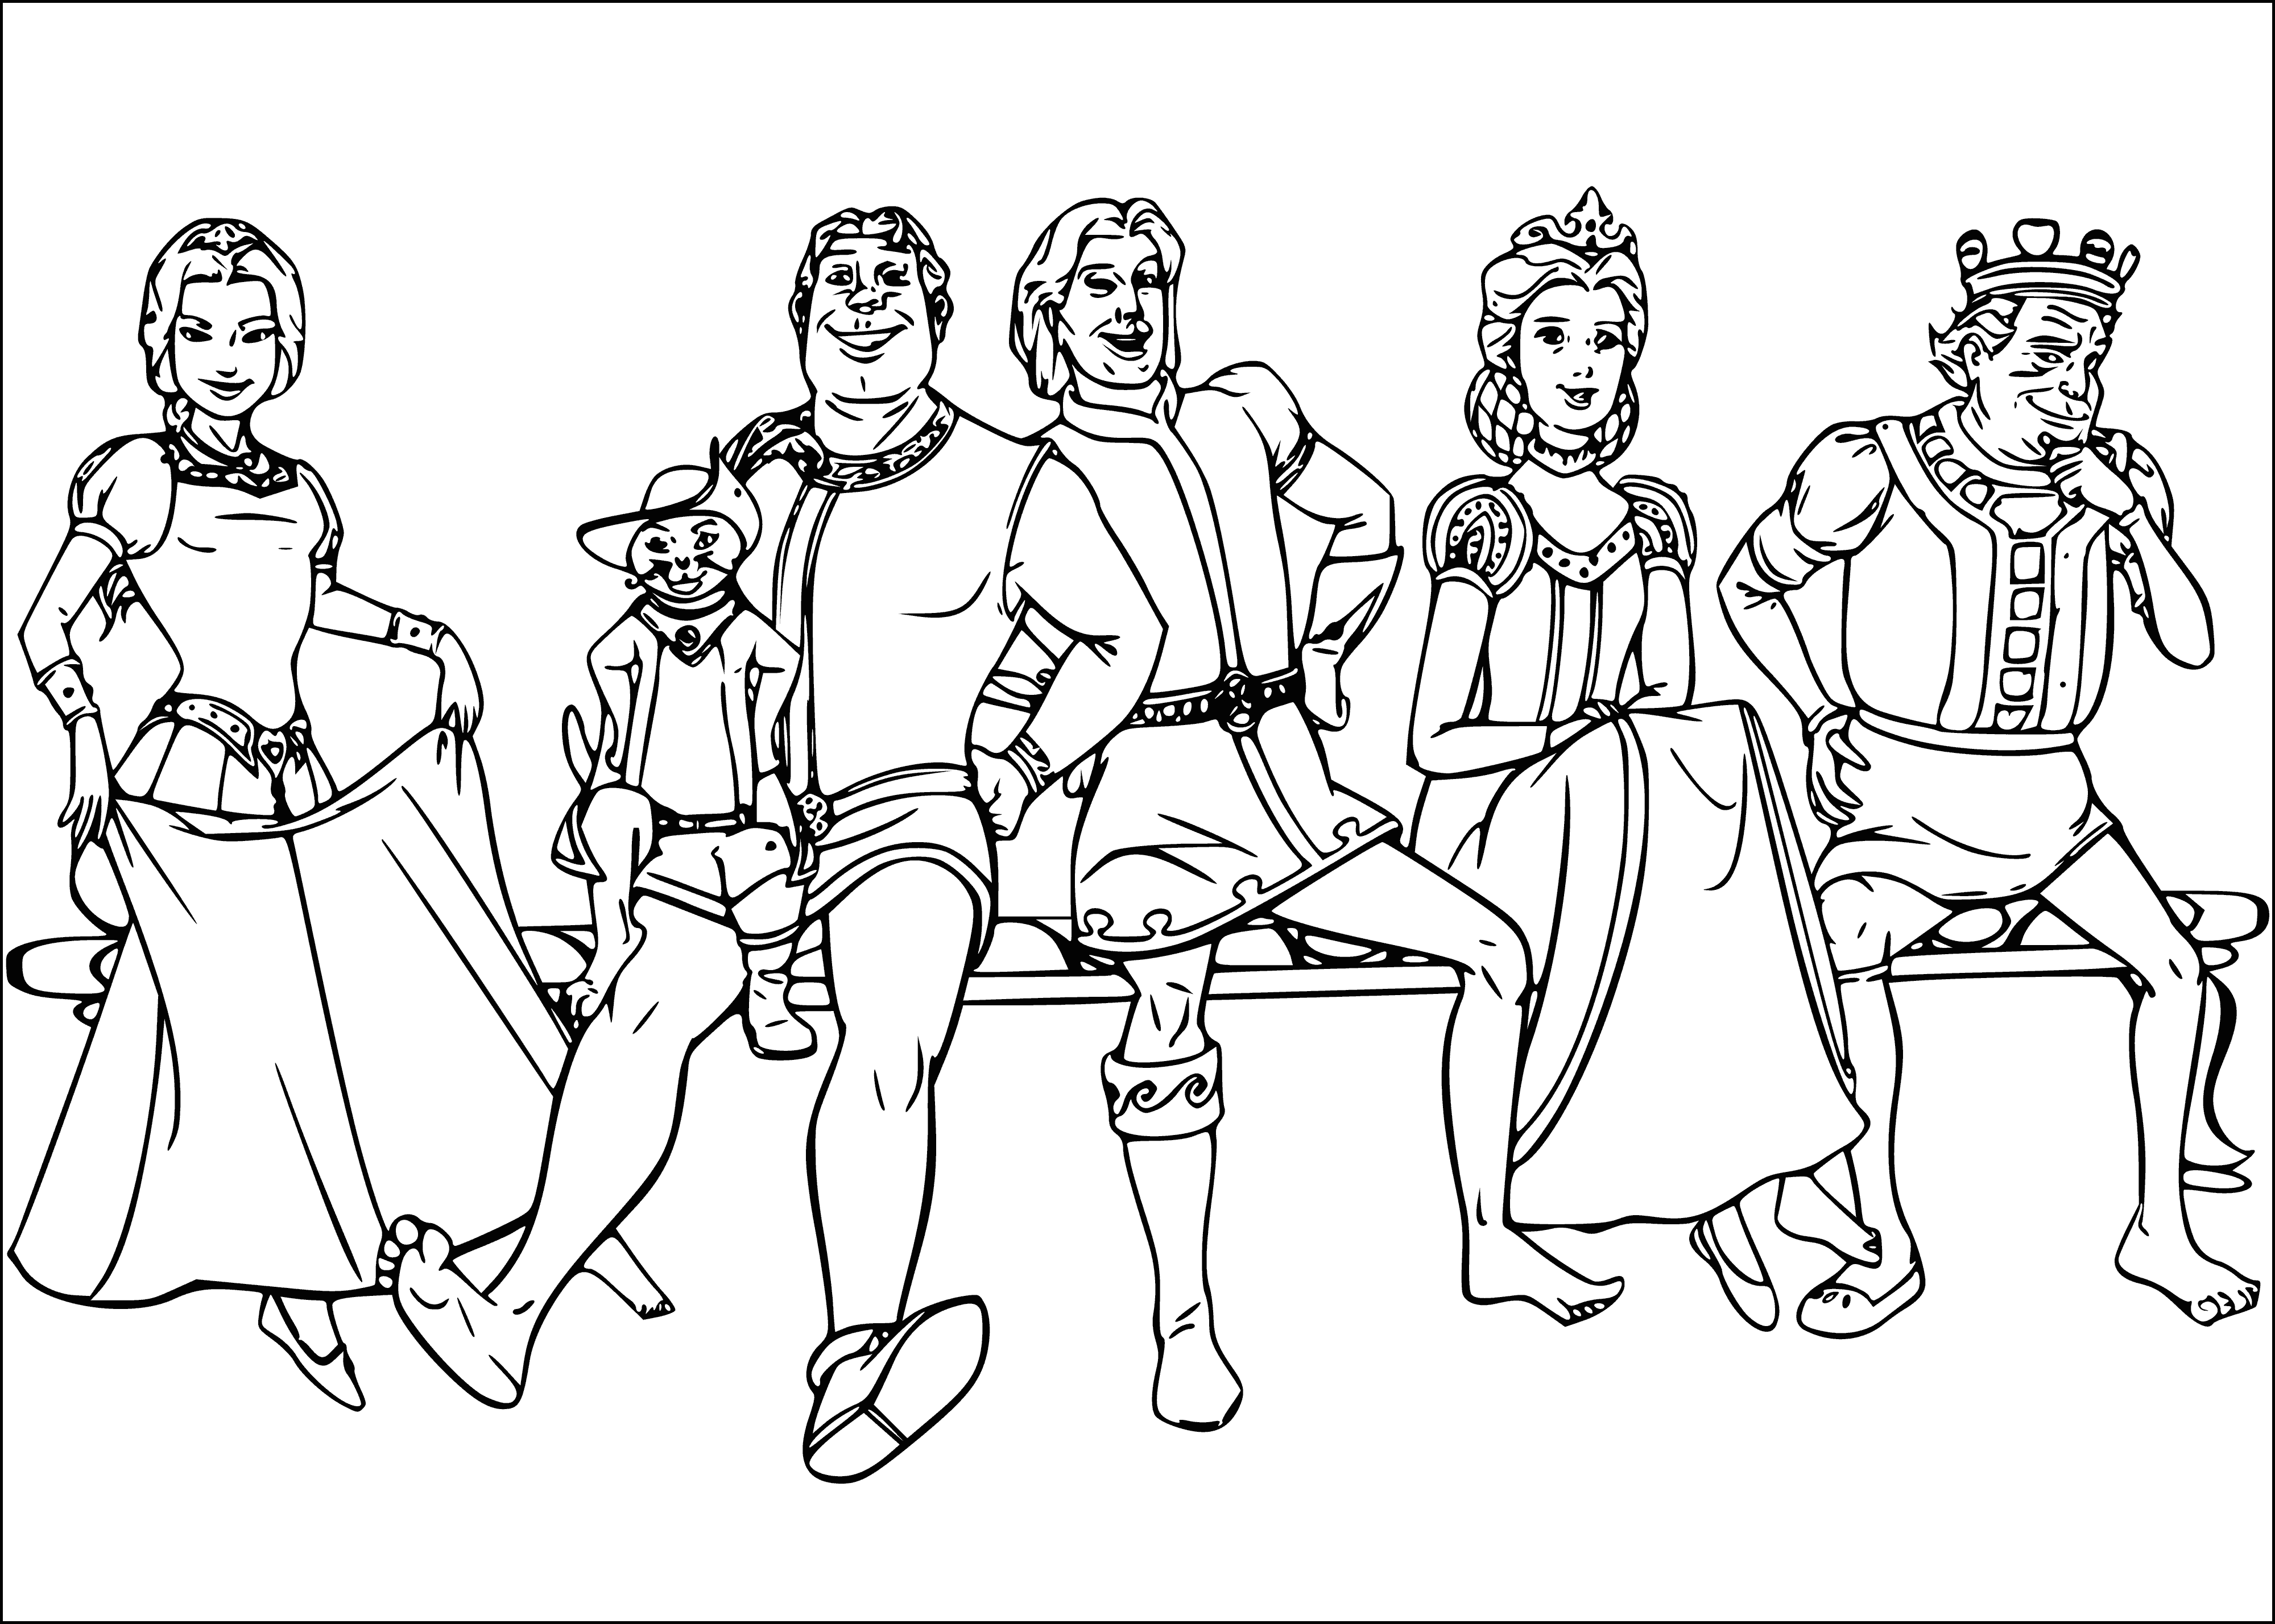 coloring page: A colorful scene of the Shrek cast, director, and producer on a happy adventure!